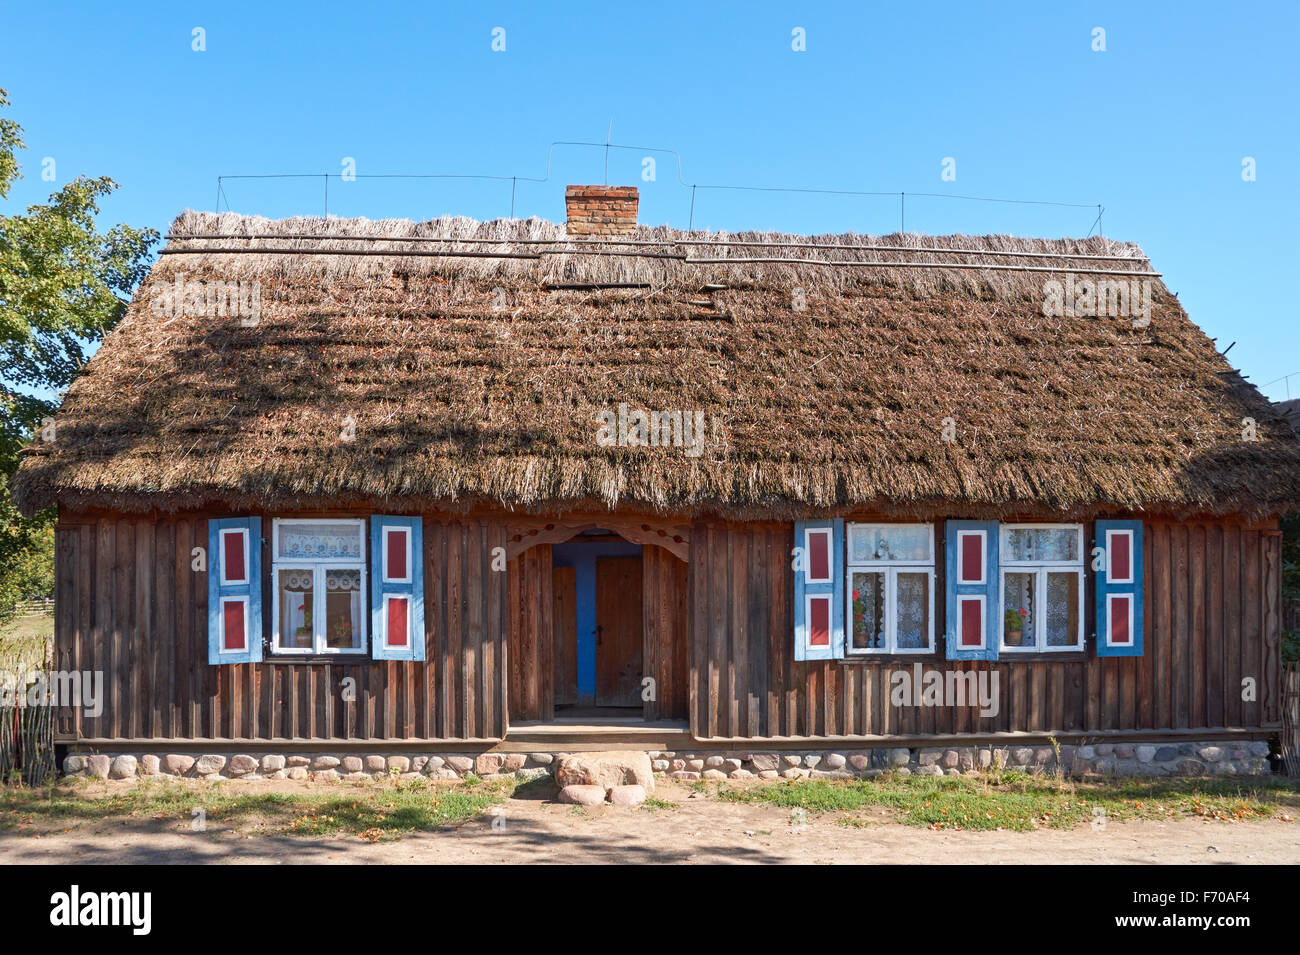 The Museum of the Mazovian Countryside in Sierpc, Poland. Old wooden peasant farmhouse with thatched roof. Stock Photo